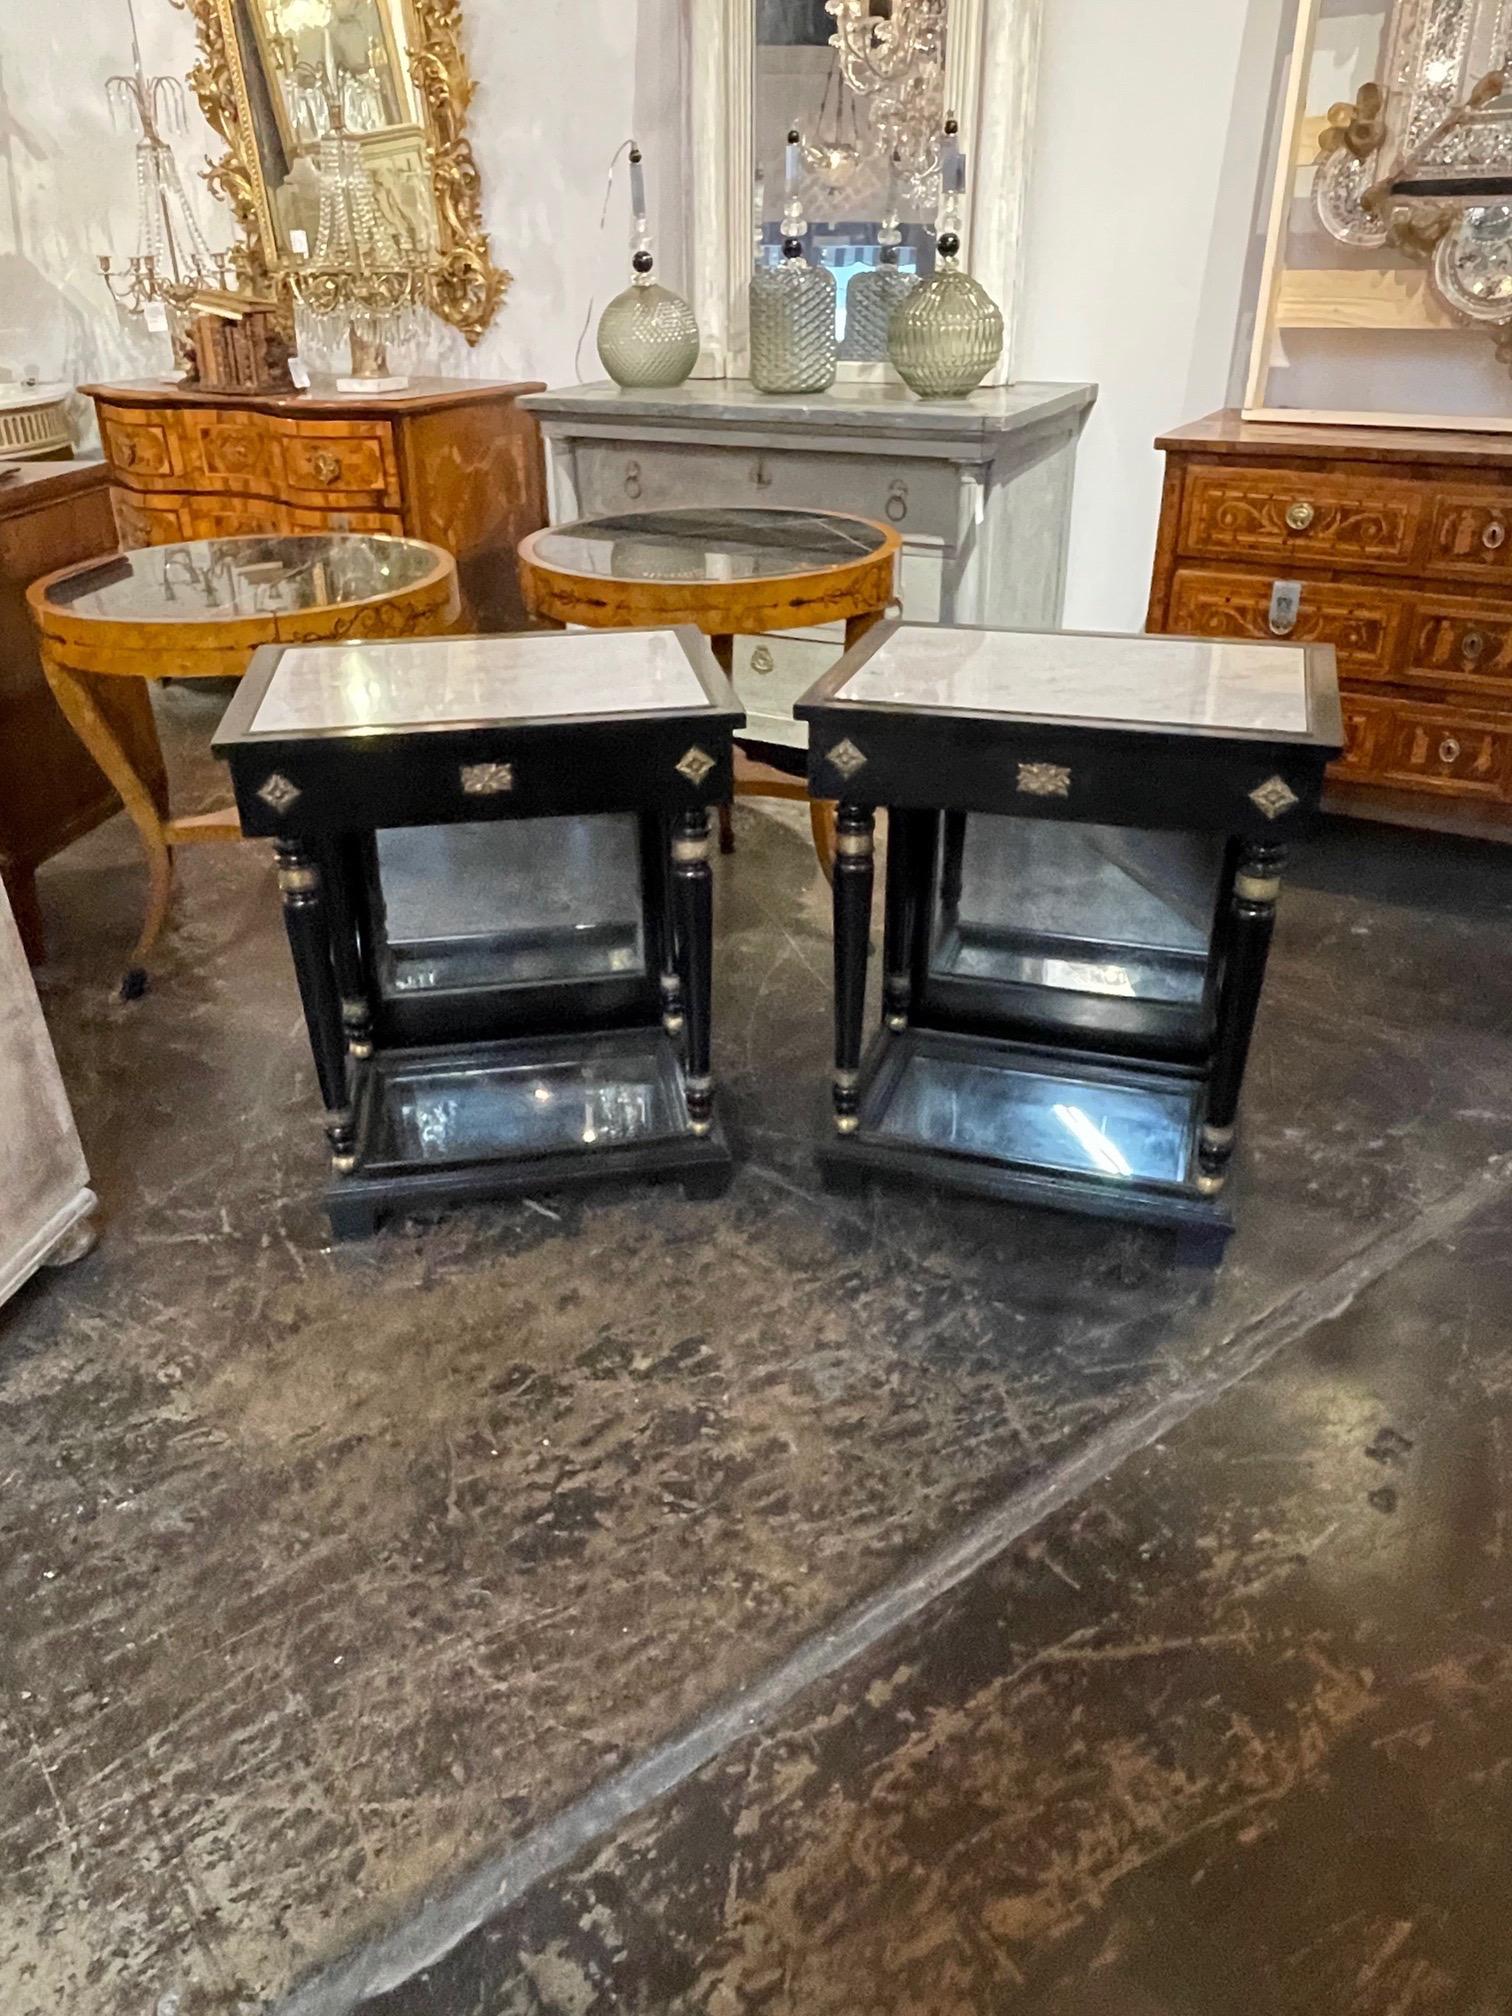 Lovely pair of French 1940s Jansen style black lacquered side tables. Very nice inlaid white marble tops and mirrored bases. Great for a variety of decors. So pretty!!